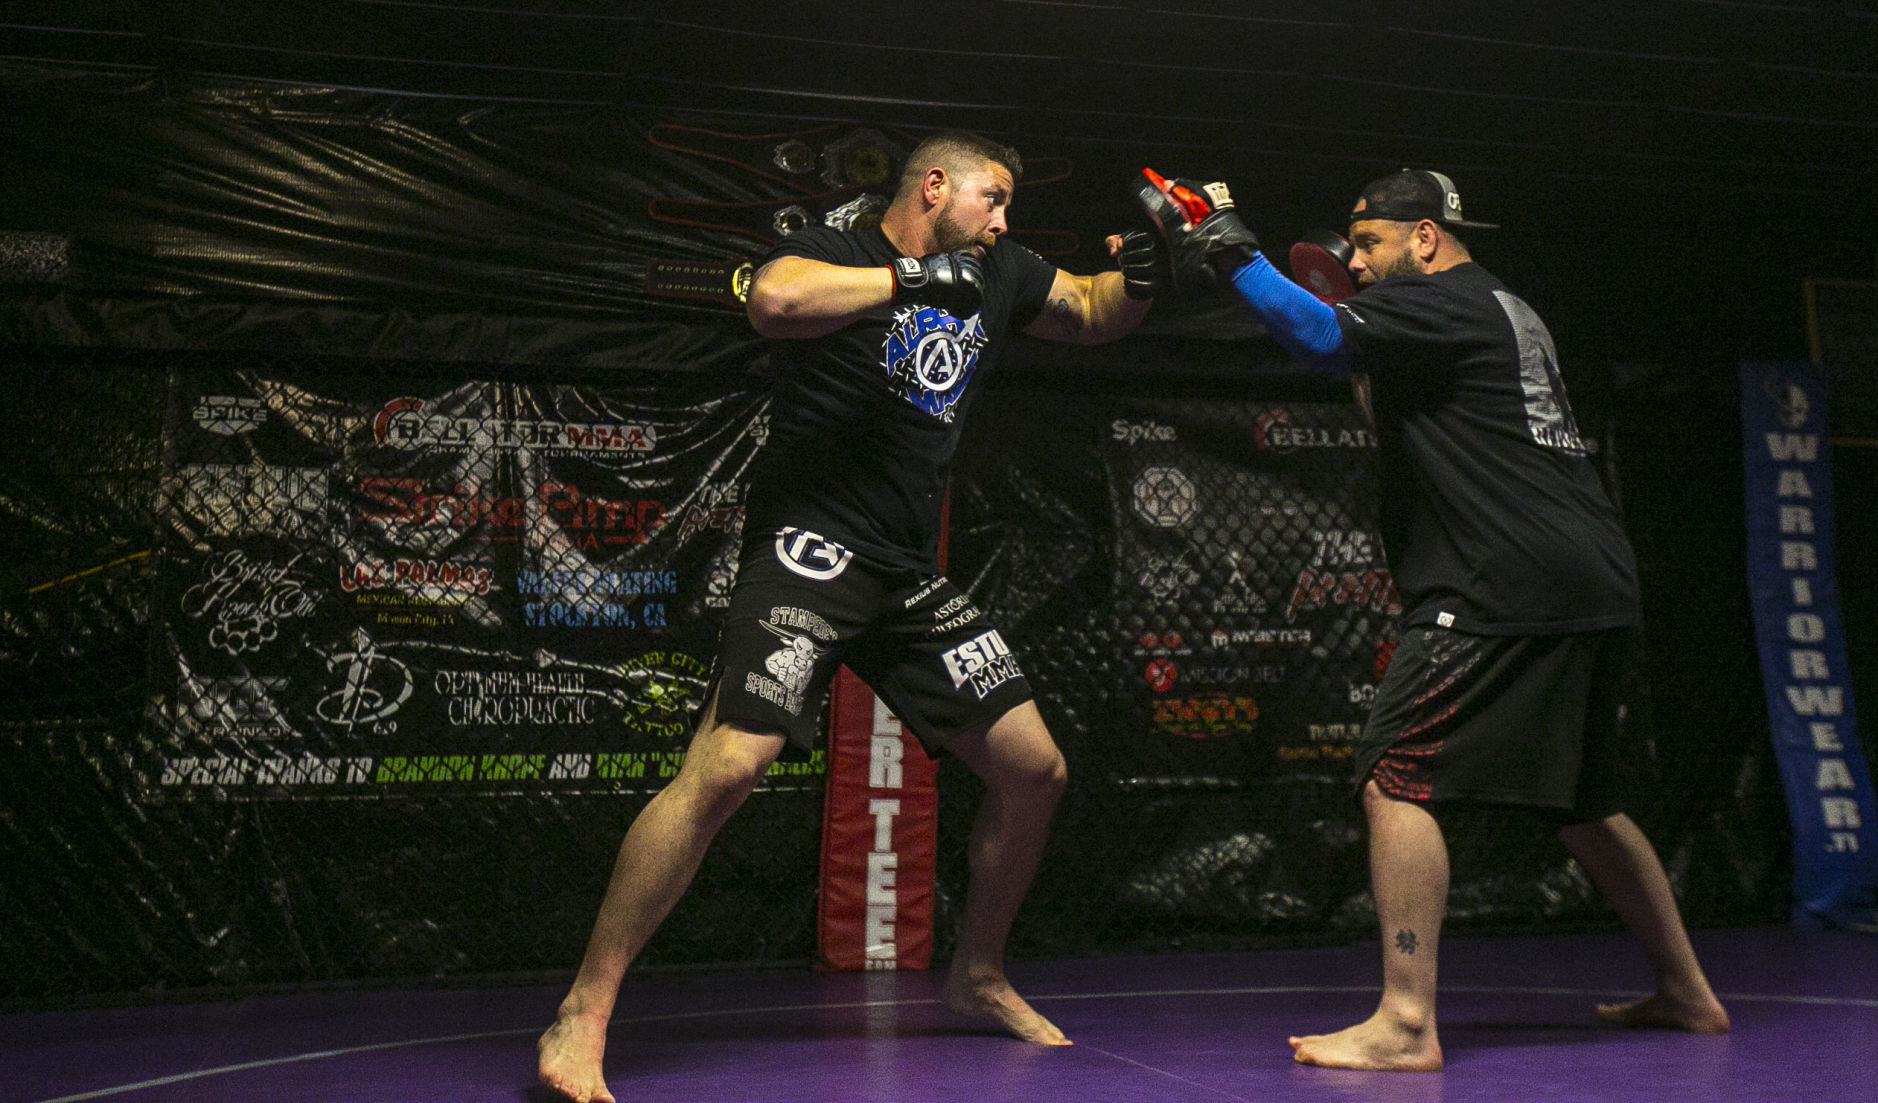 Mixed martial arts Local fighter Jordan Rose highlights cage fighting event pic picture